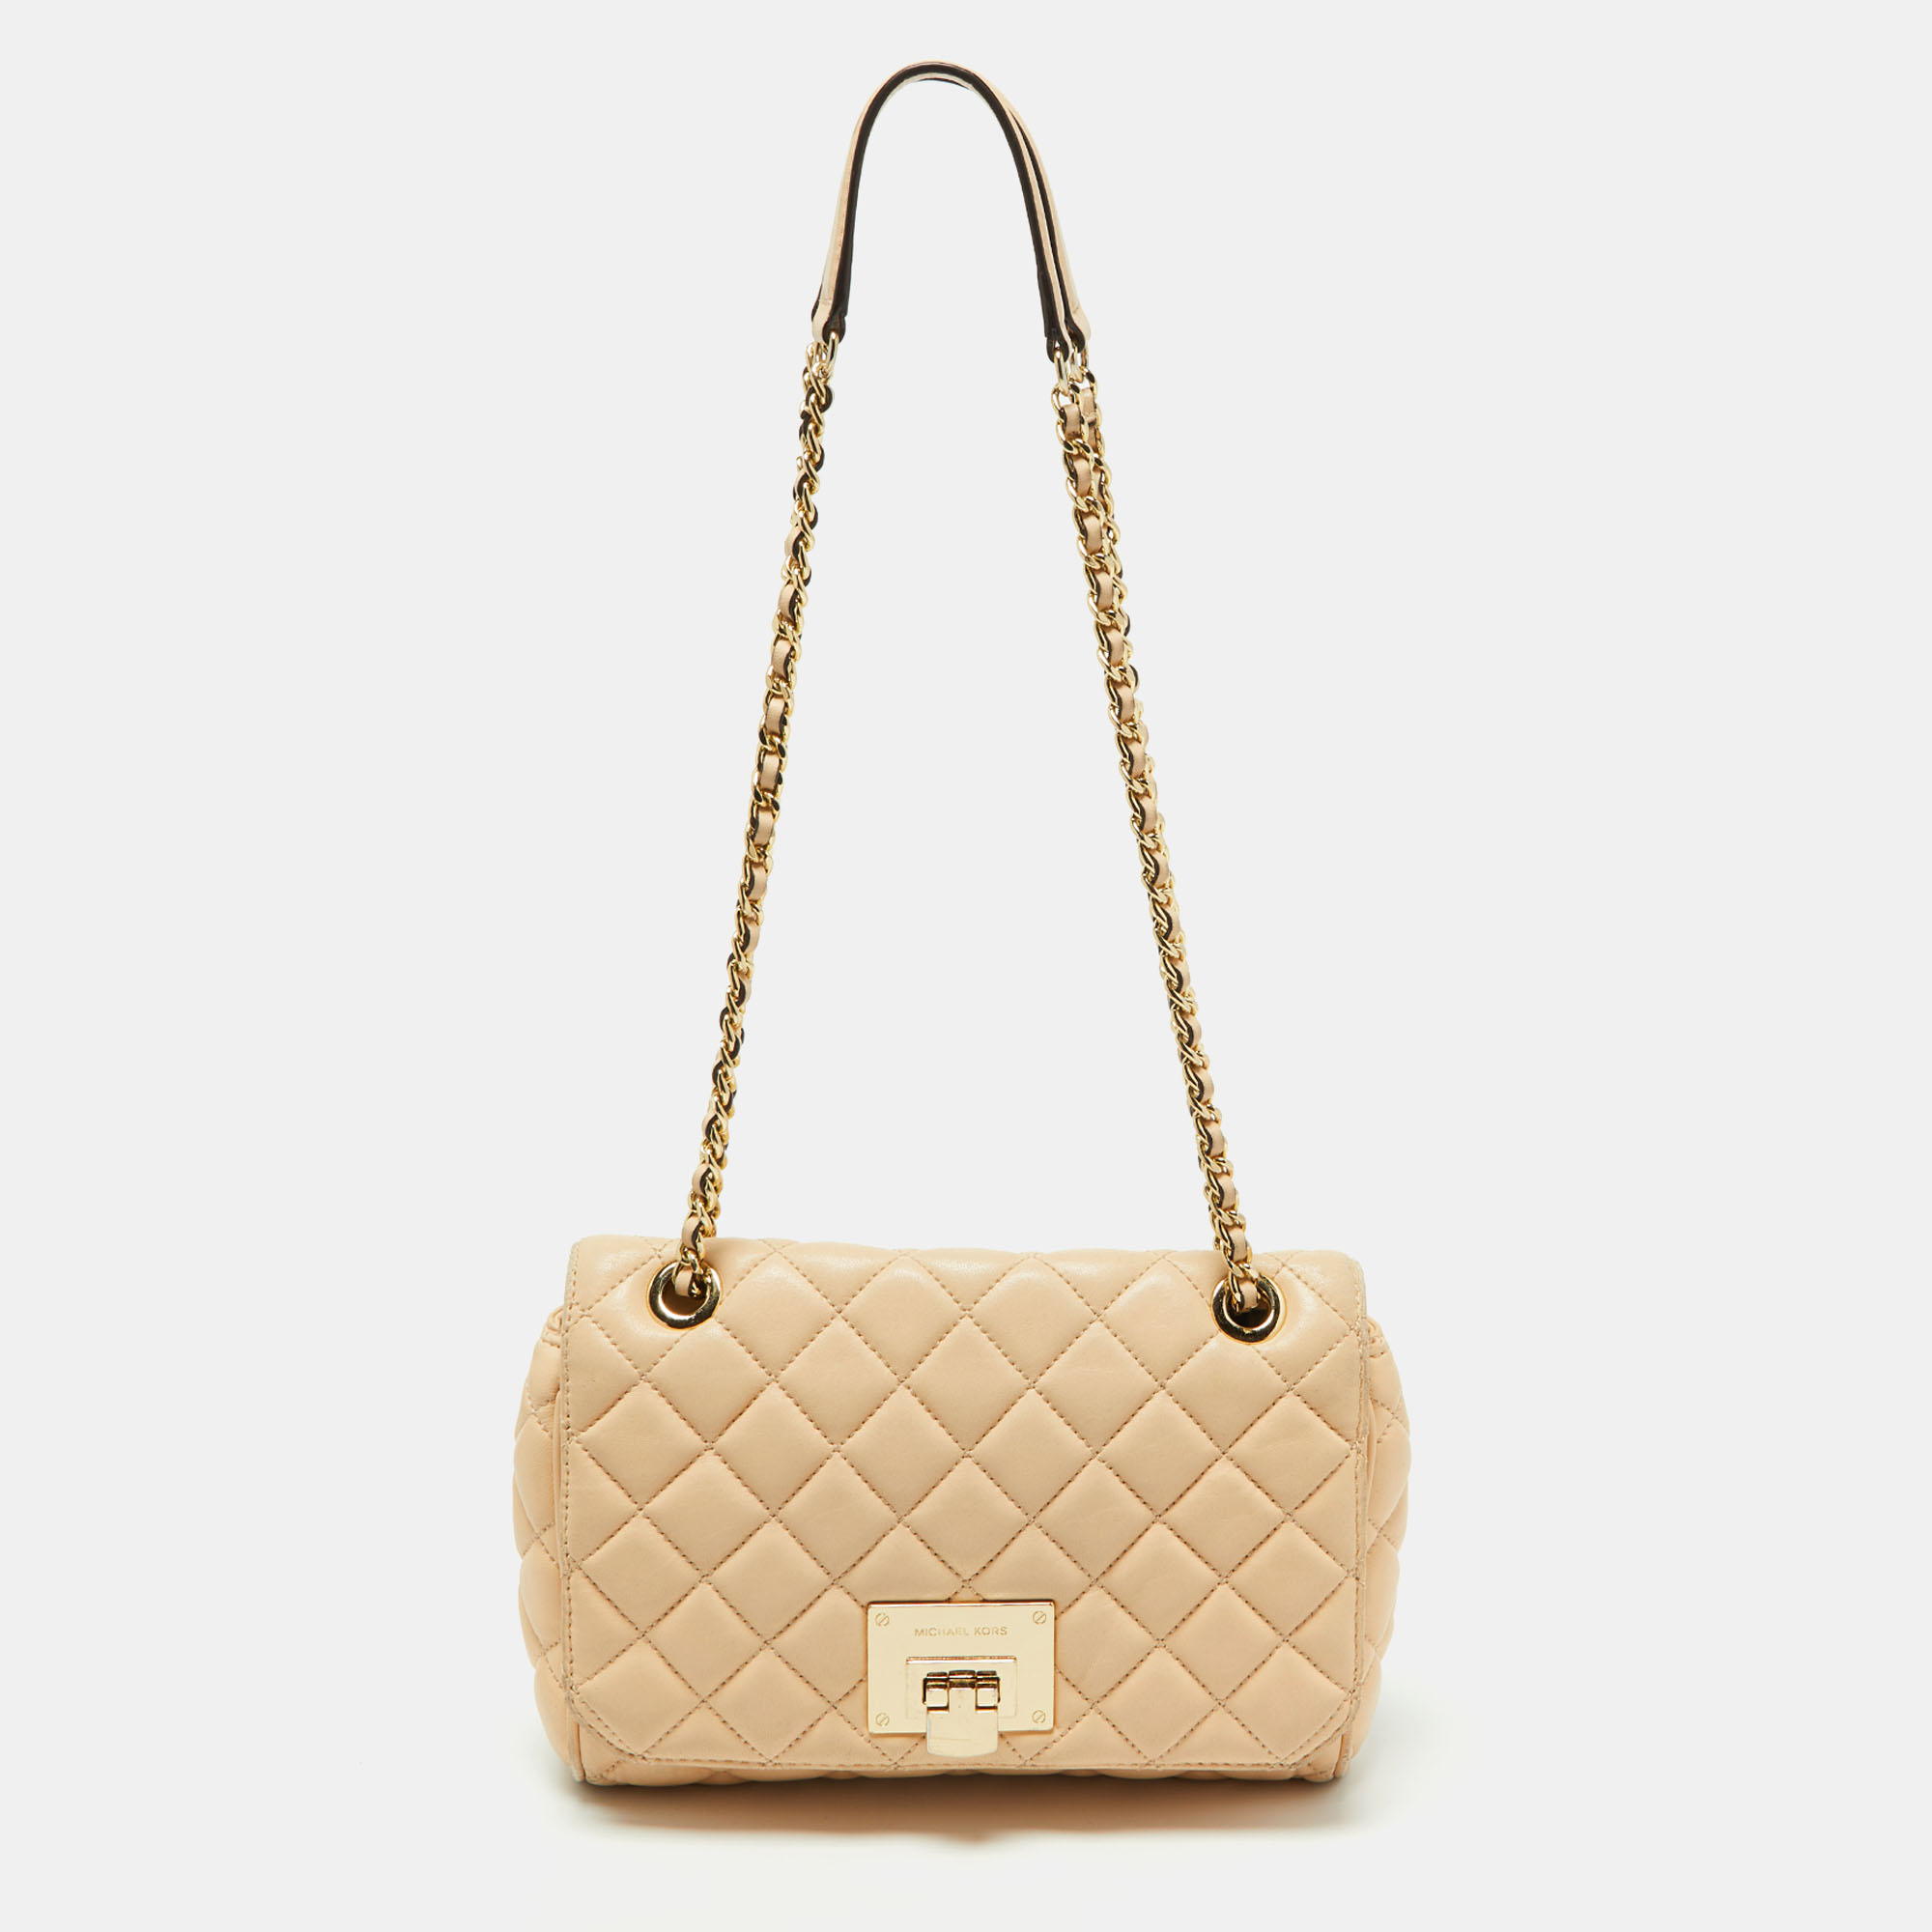 With the festivities around the corner pamper yourself with this chic shoulder bag from the house of Michael Kors. It has been designed from a beige quilted leather body with a flap style secured with a gold tone buckle closure. It comes fitted with chain shoulder strap fitted with a leather shoulder pad. This bag is ideally proportioned to hold your evening essentials in great style.